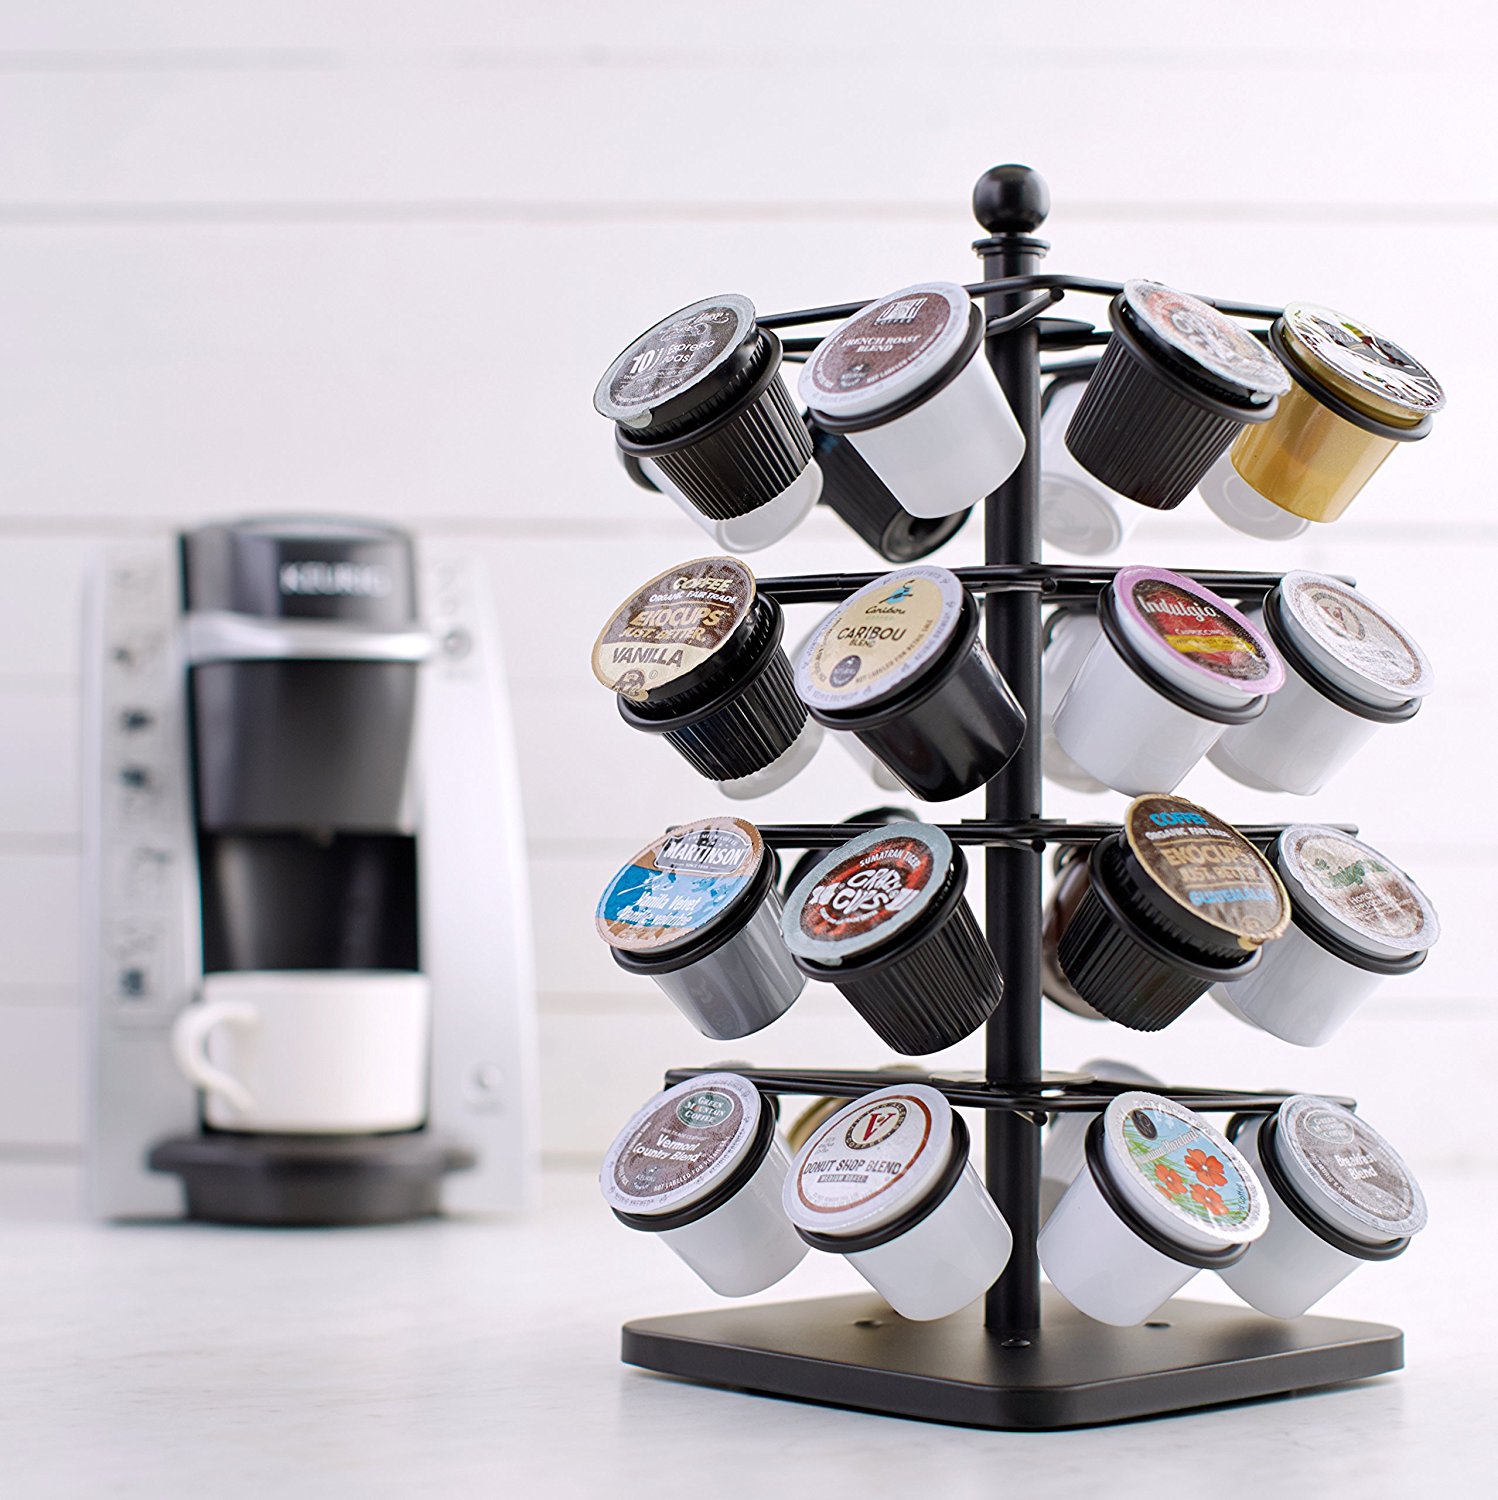 K-Cup Carousel – Holds 35 K-Cups in Black $12.14!